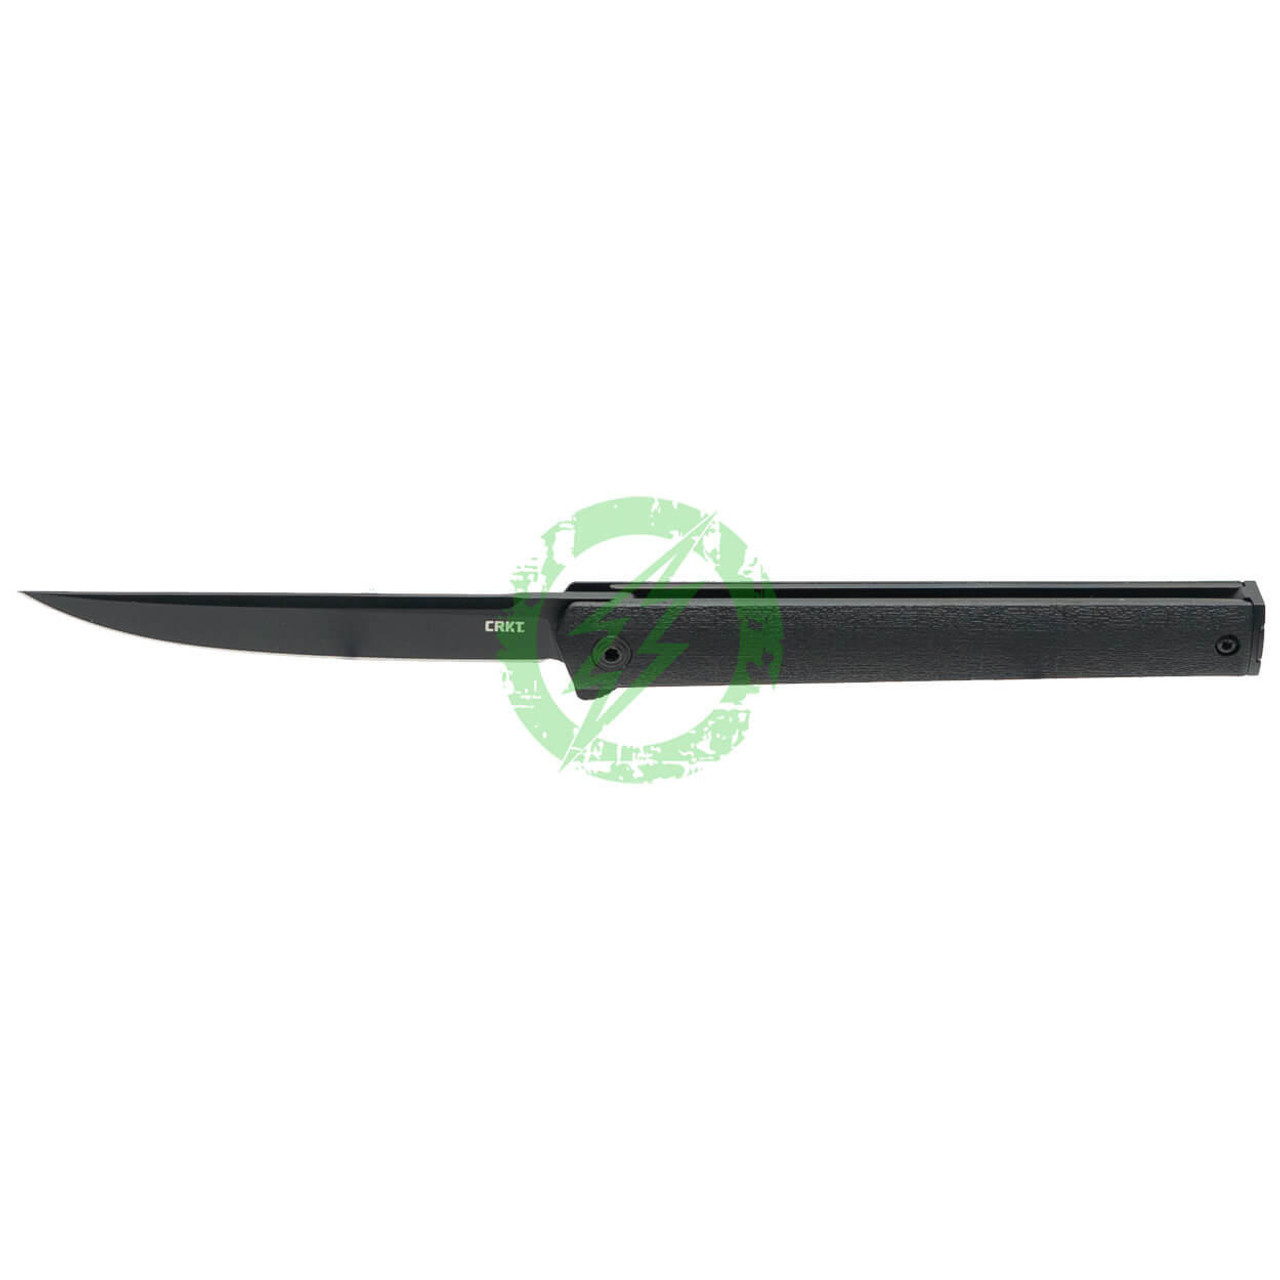 CRKT (Columbia River Knife Tool) CRKT CEO Flipper Blackout Folding Blade Knife with AUS 8 Blade & Glass Reinforced Nylon Handle 